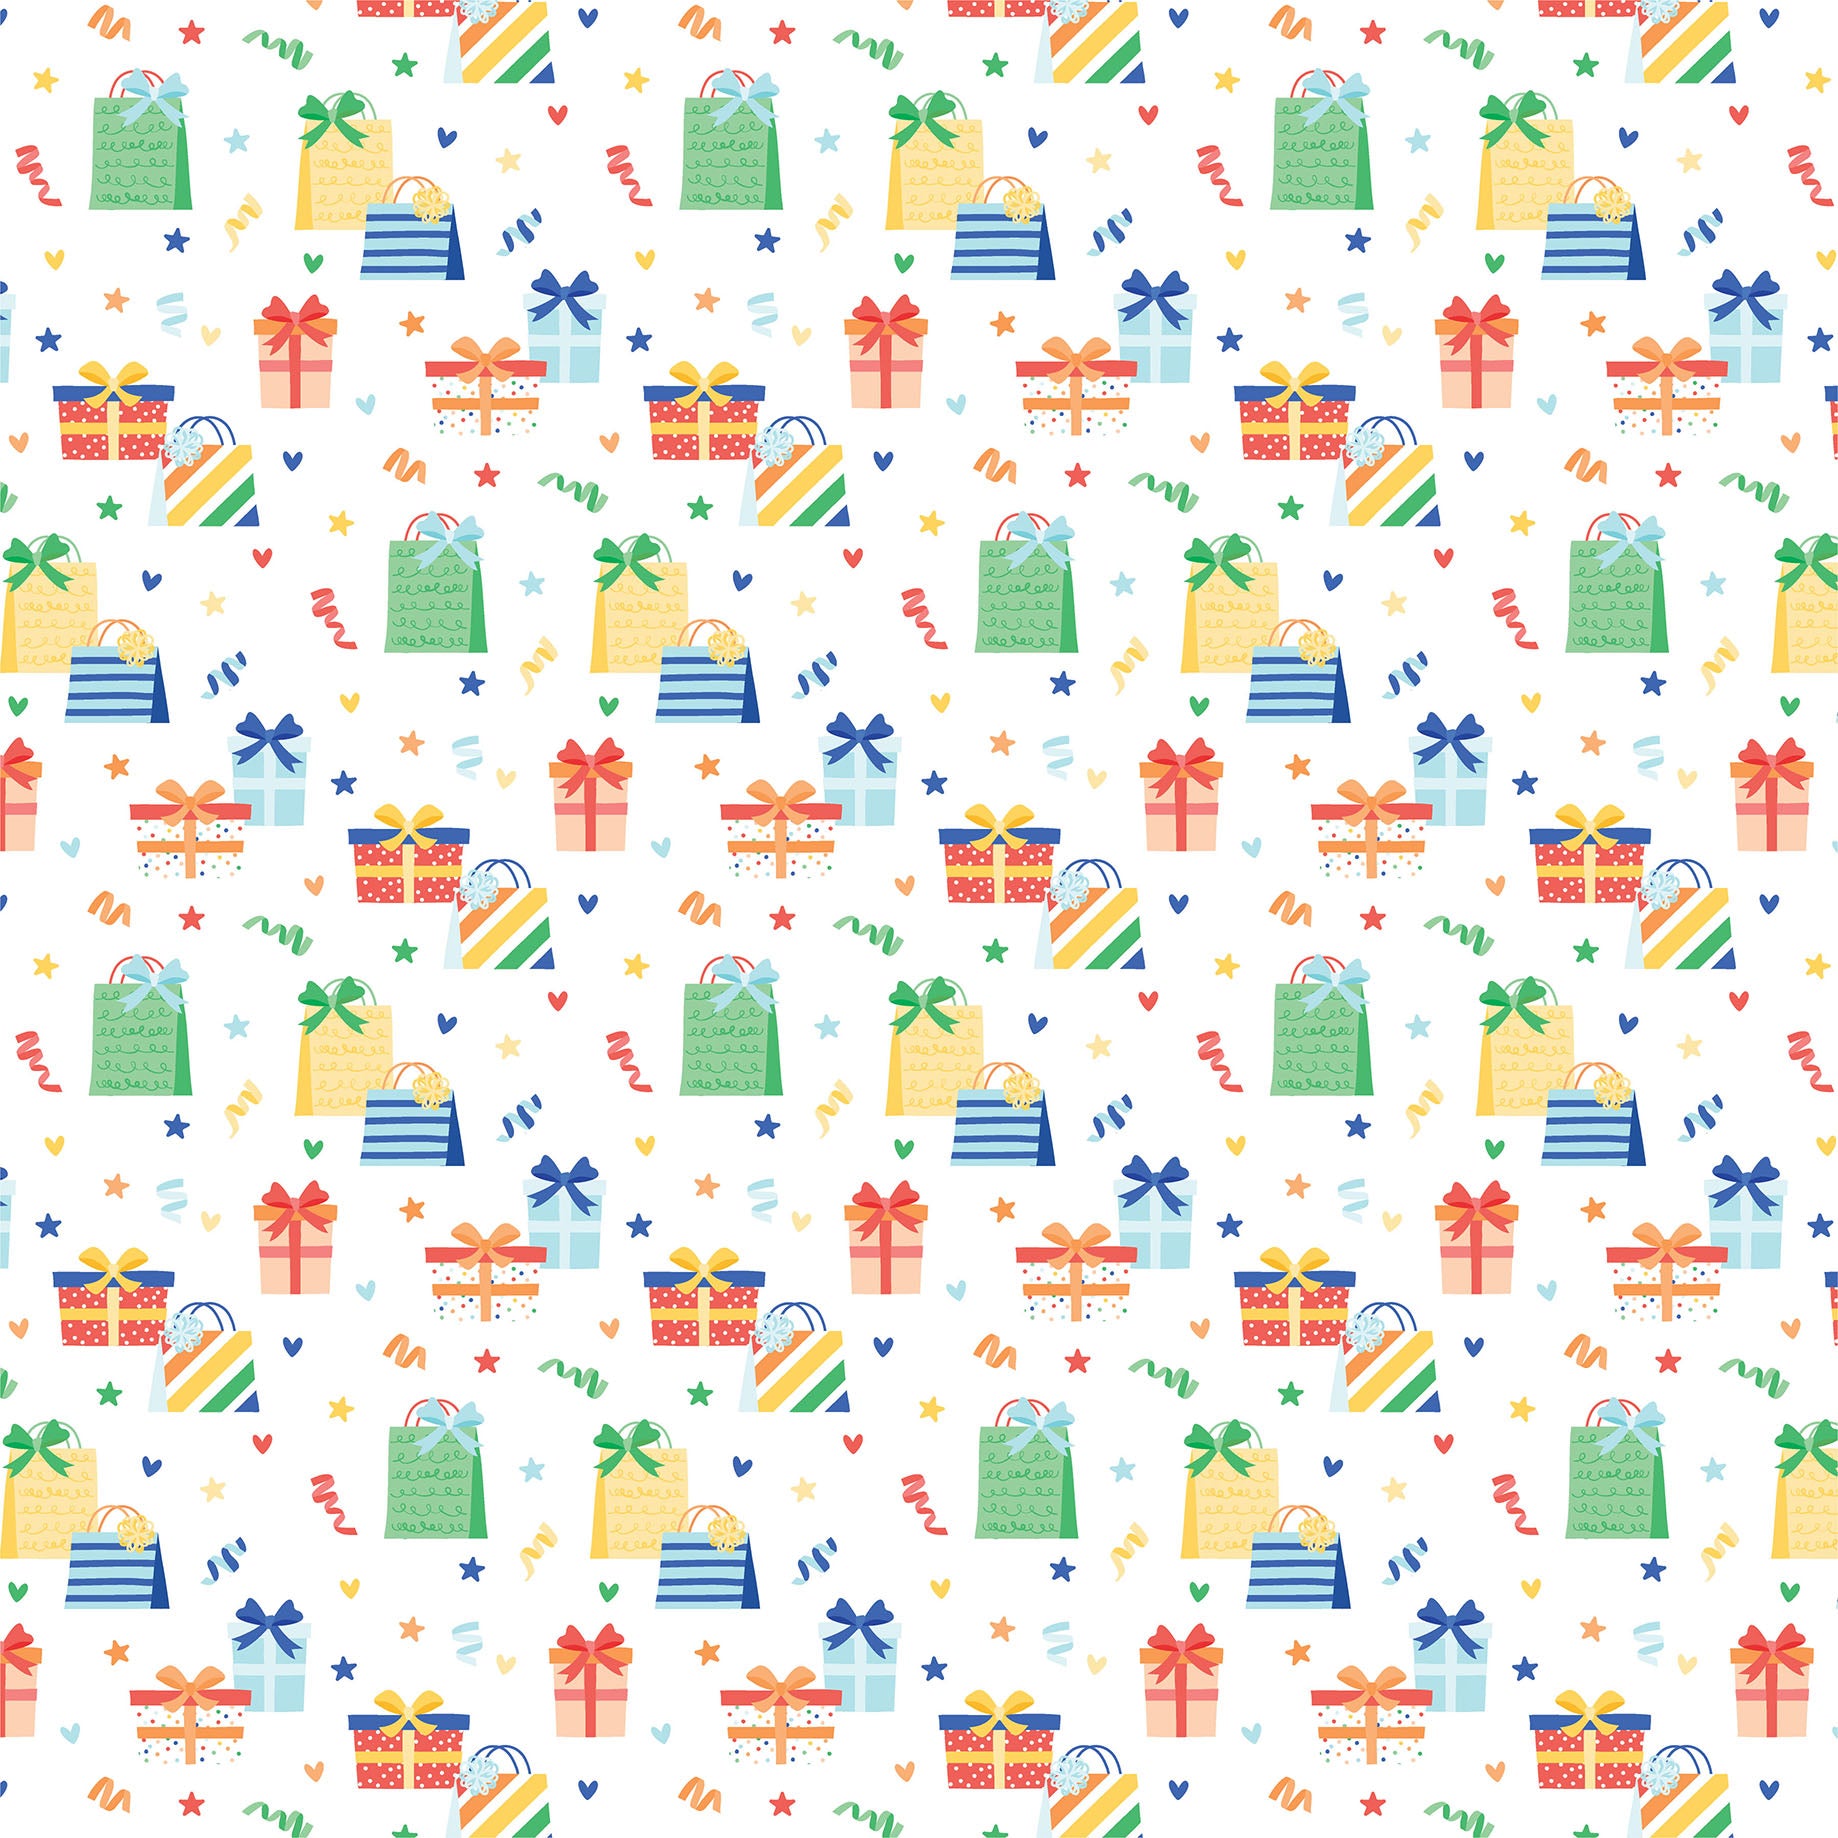 Make a Wish Birthday Boy Collection A Gift For You 12 x 12 Double-Sided Scrapbook Paper by Echo Park Paper